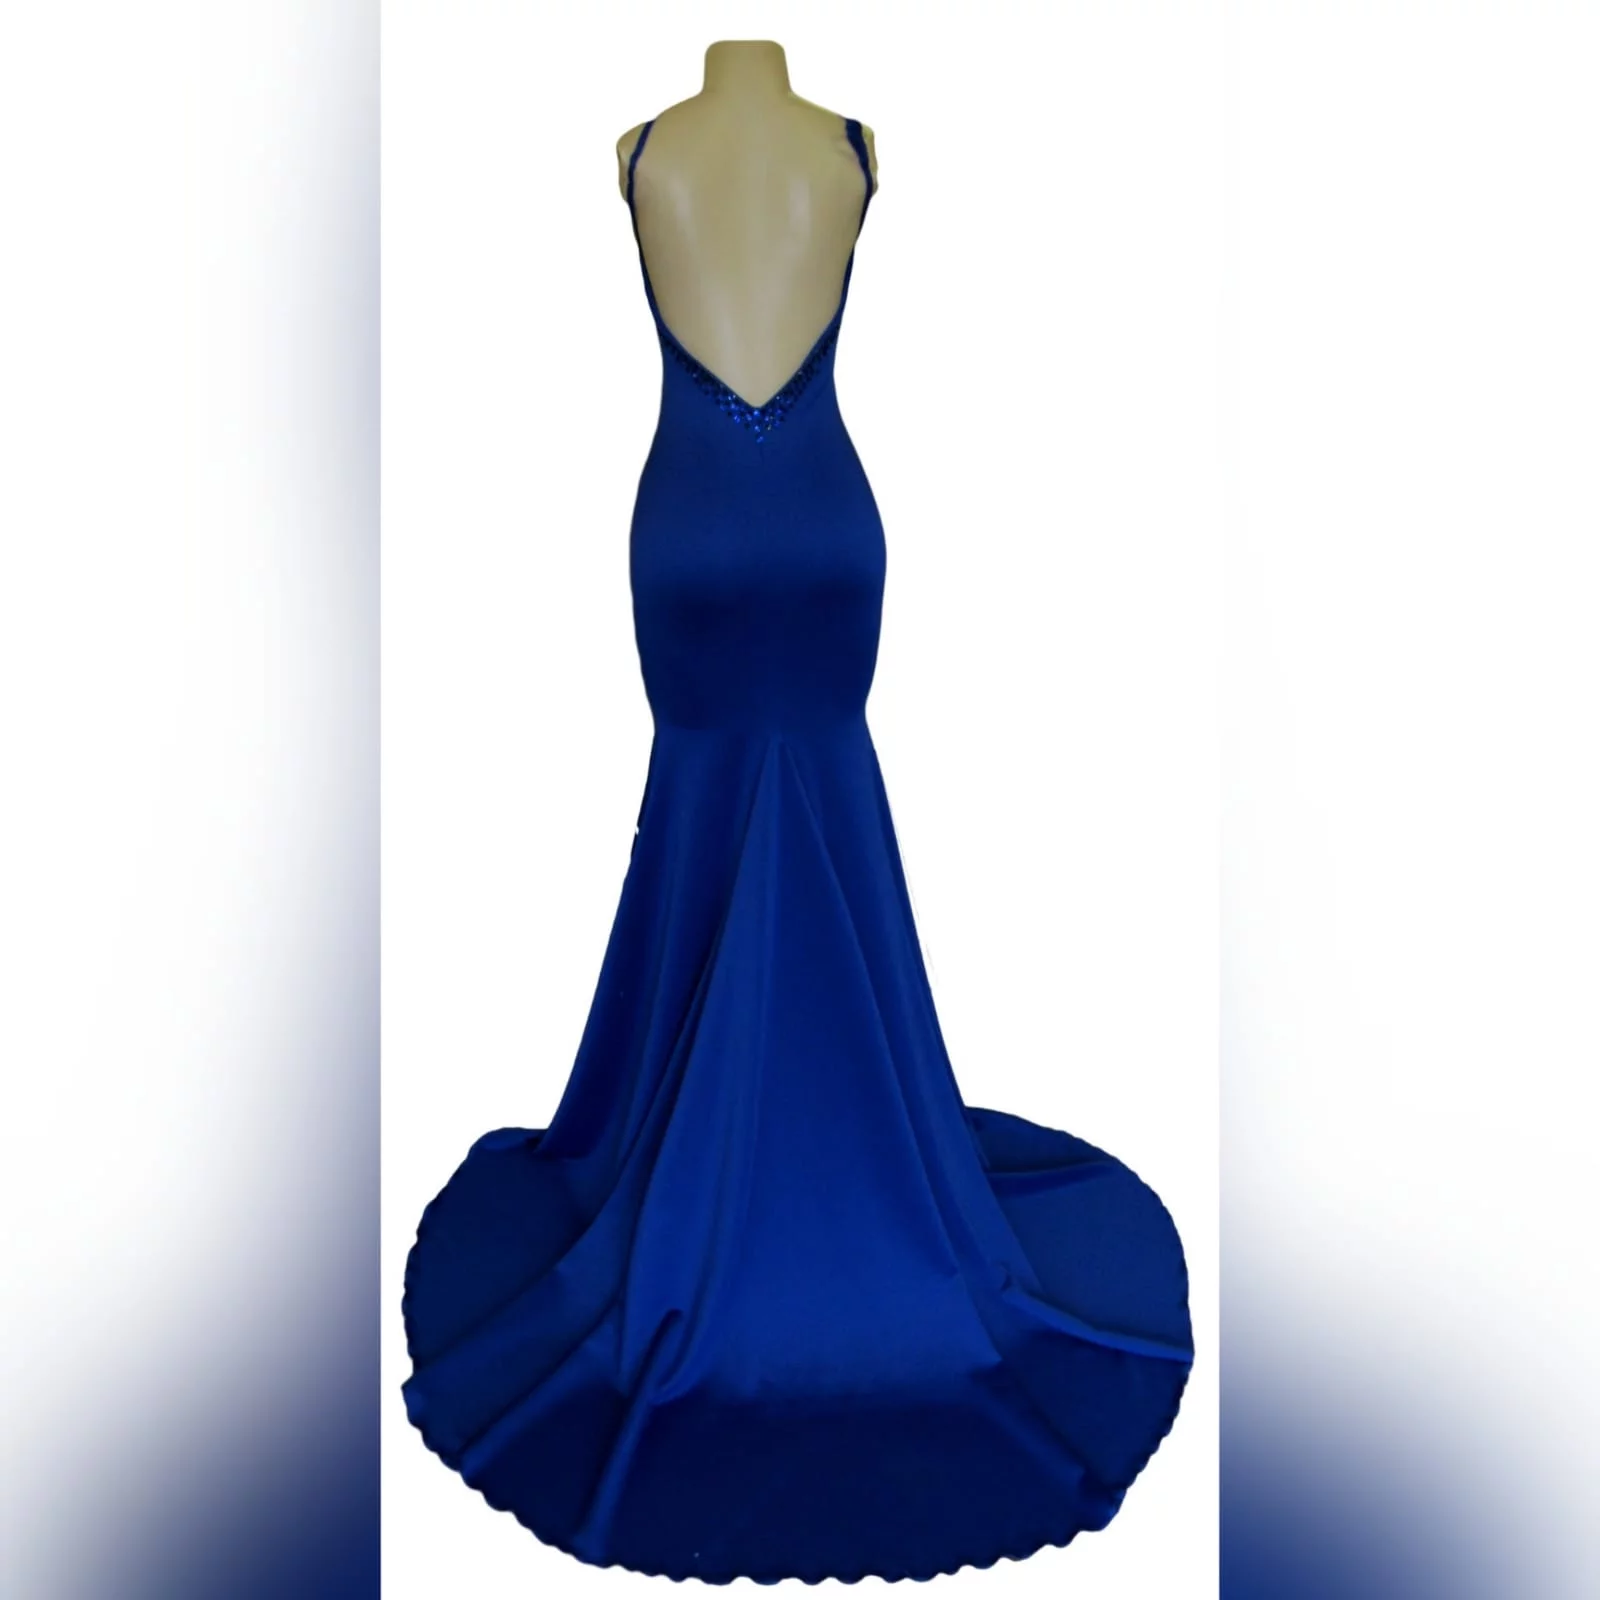 Royal blue soft mermaid beaded prom dress 7 royal blue soft mermaid beaded prom dress, with a v neckline, low v open back detailed with blue and black beads, thin shoulder straps and a long train.